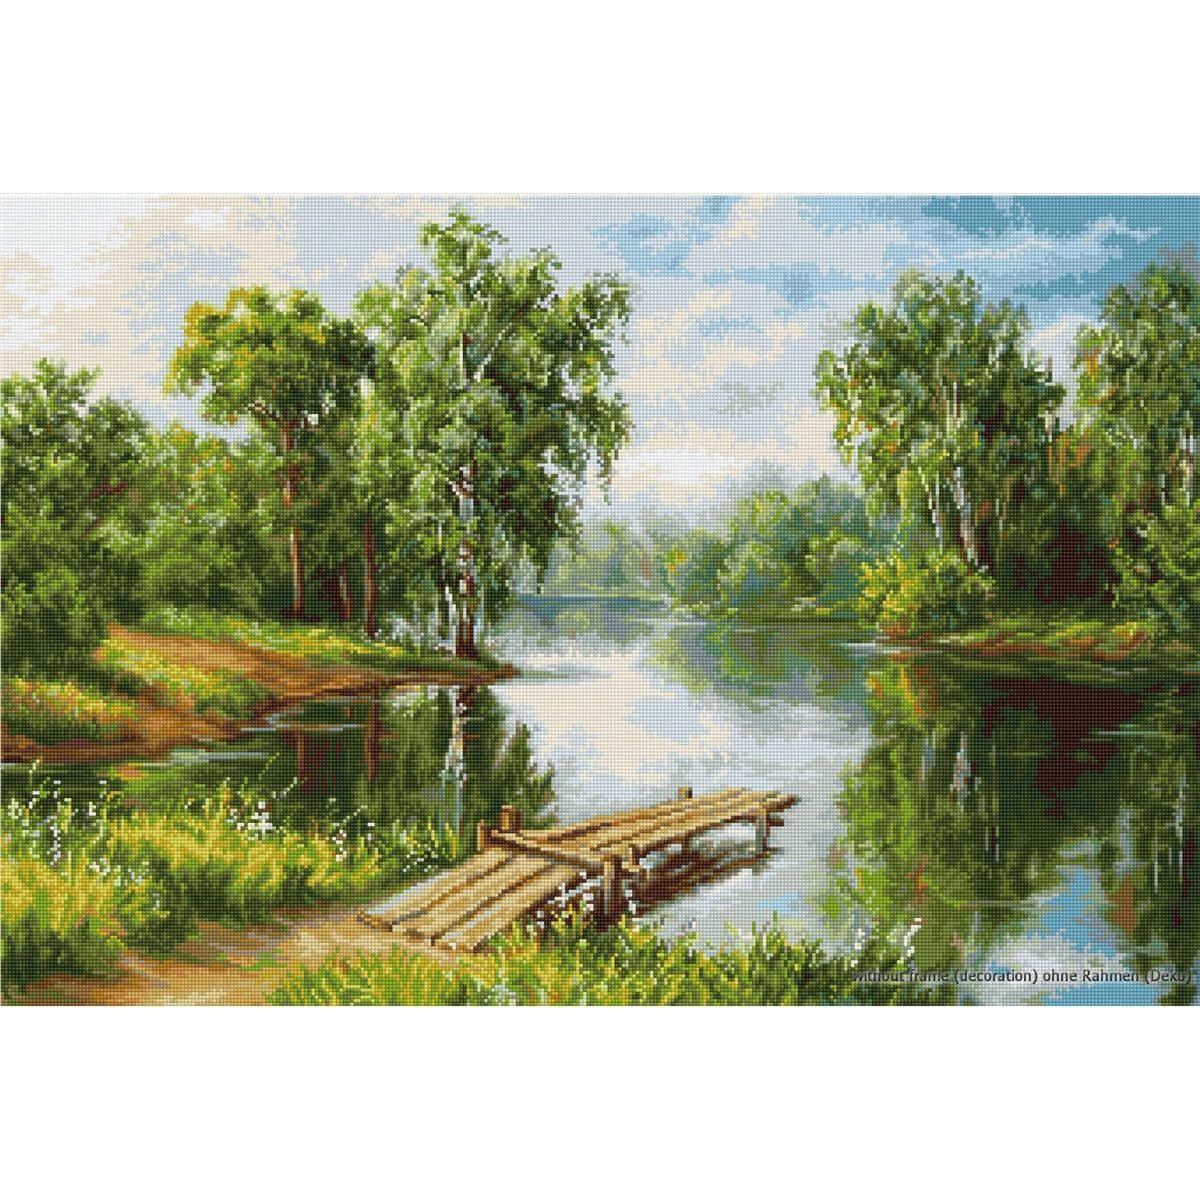 A tranquil lakeside scene shows a wooden jetty jutting...